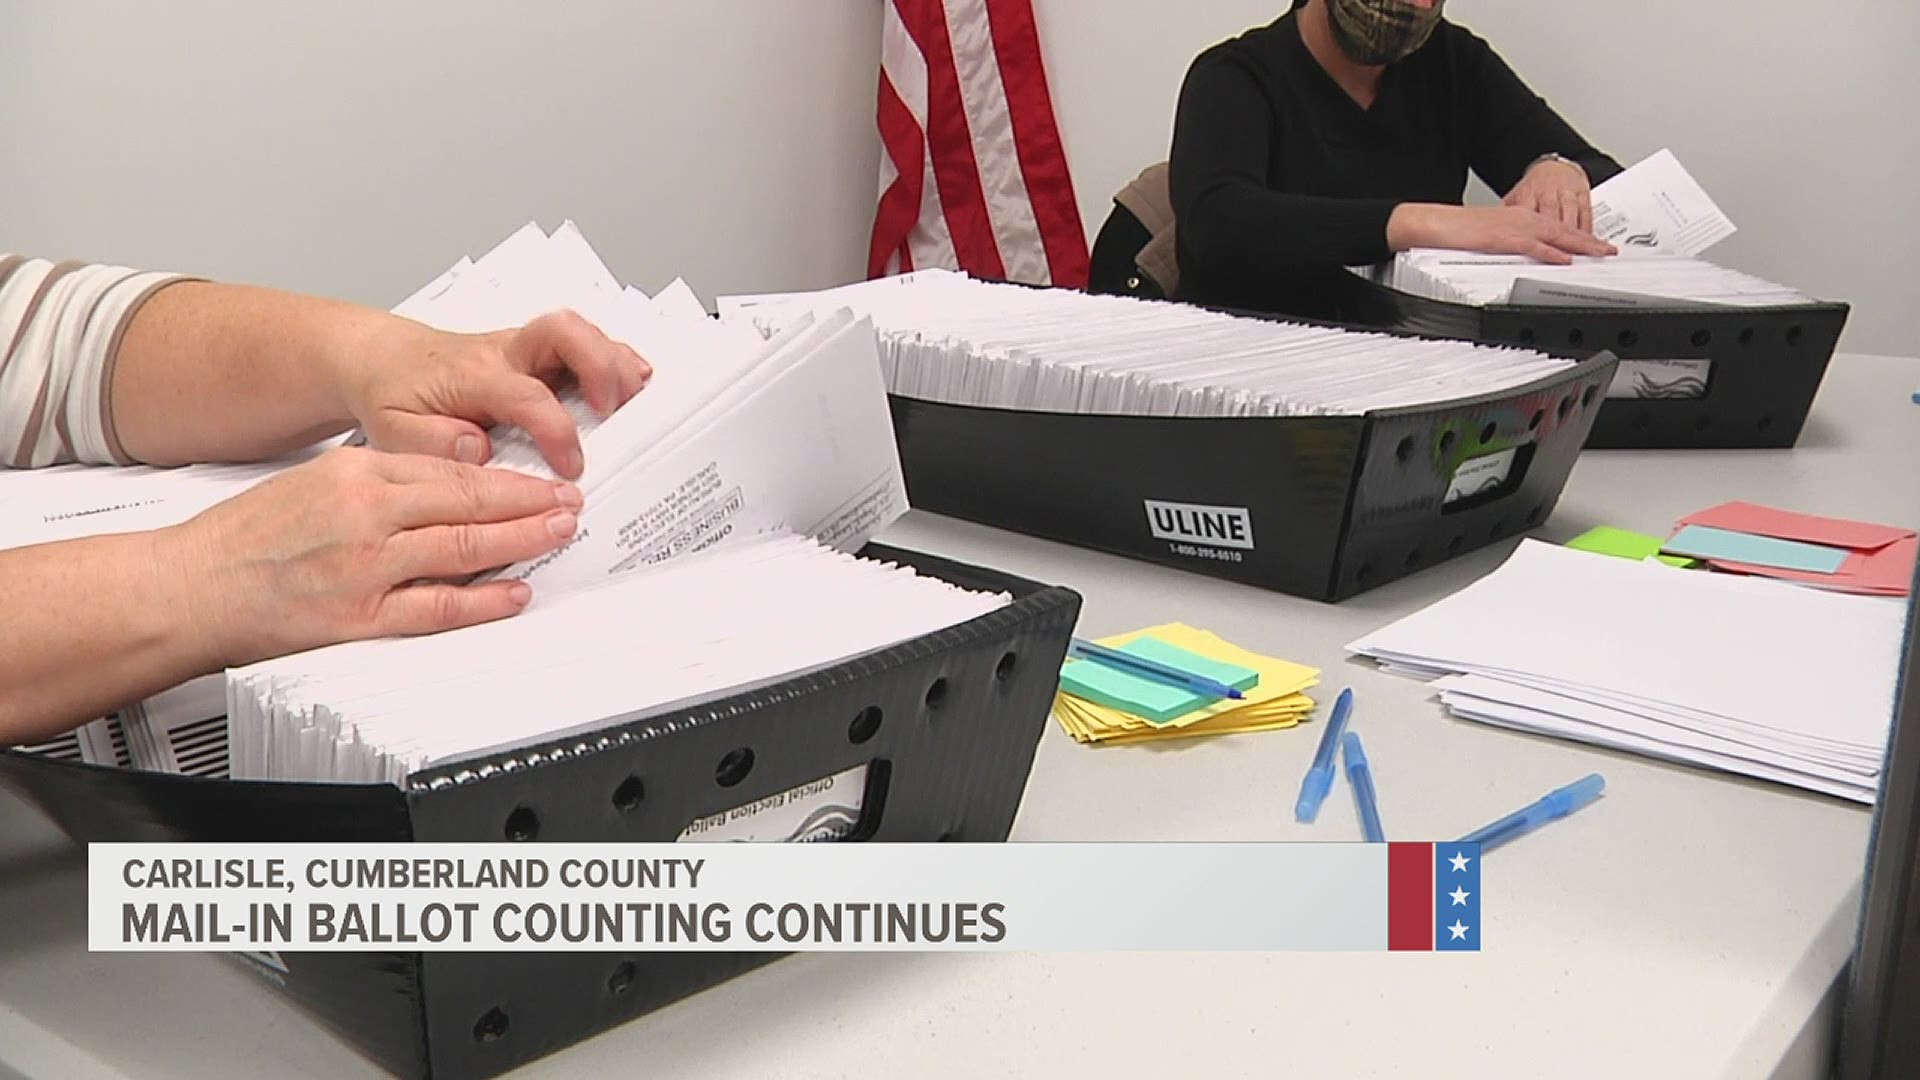 The county received about 53,000 mail-in ballots by 8 p.m. on Election Day. They counted about 21,000 on Wednesday.